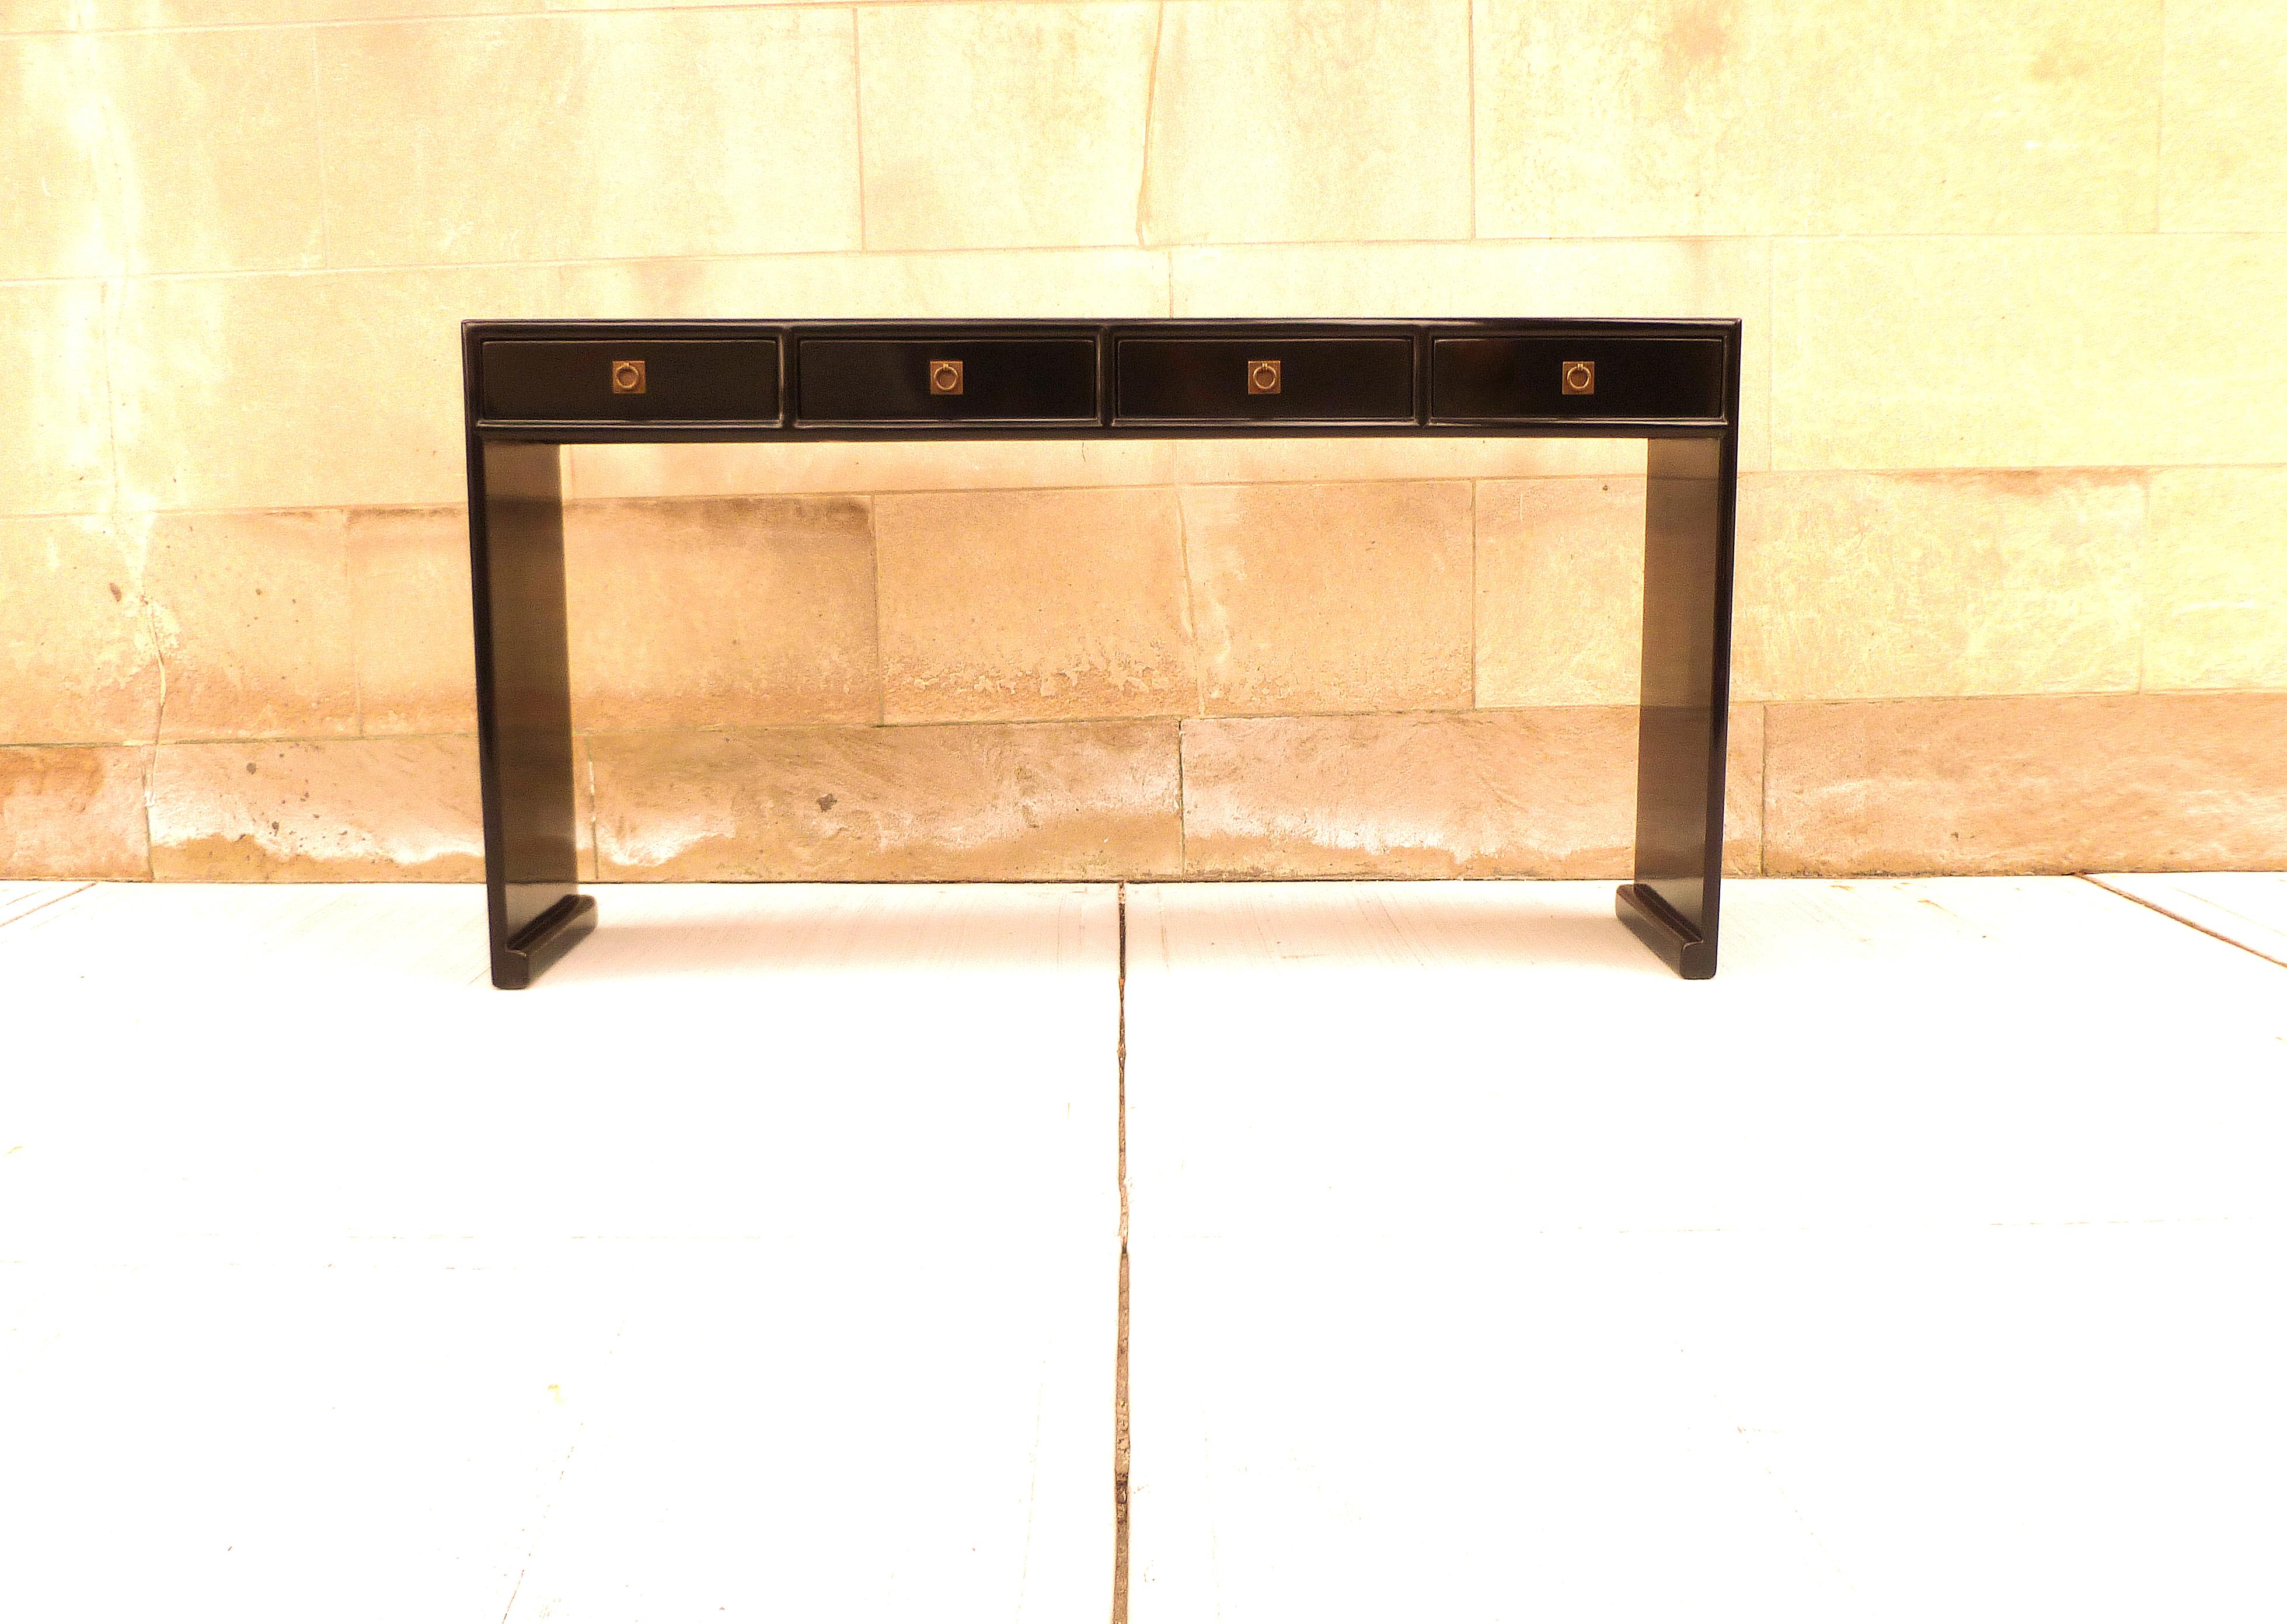 Fine black lacquer console table with four drawers, waterfall legs, brass fitting, elegant and simple form, beautiful lines. We carry Fine quality furniture with elegant finished and has been appeared many times in 